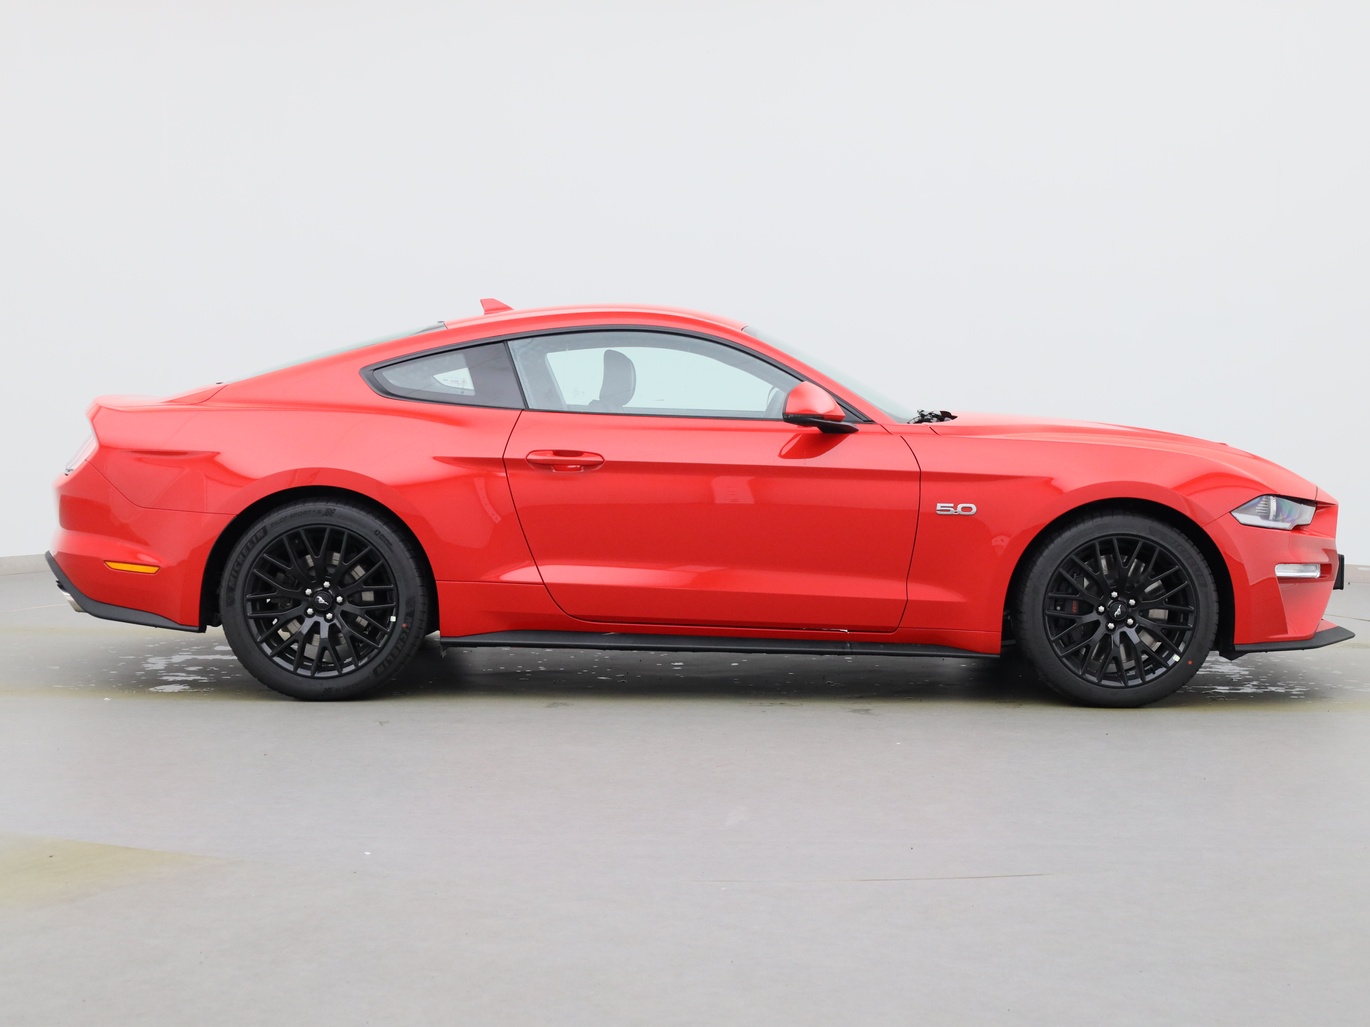  Ford Mustang GT Coupé V8 450PS / Premium 2 / B&O in Race-rot von Rechts